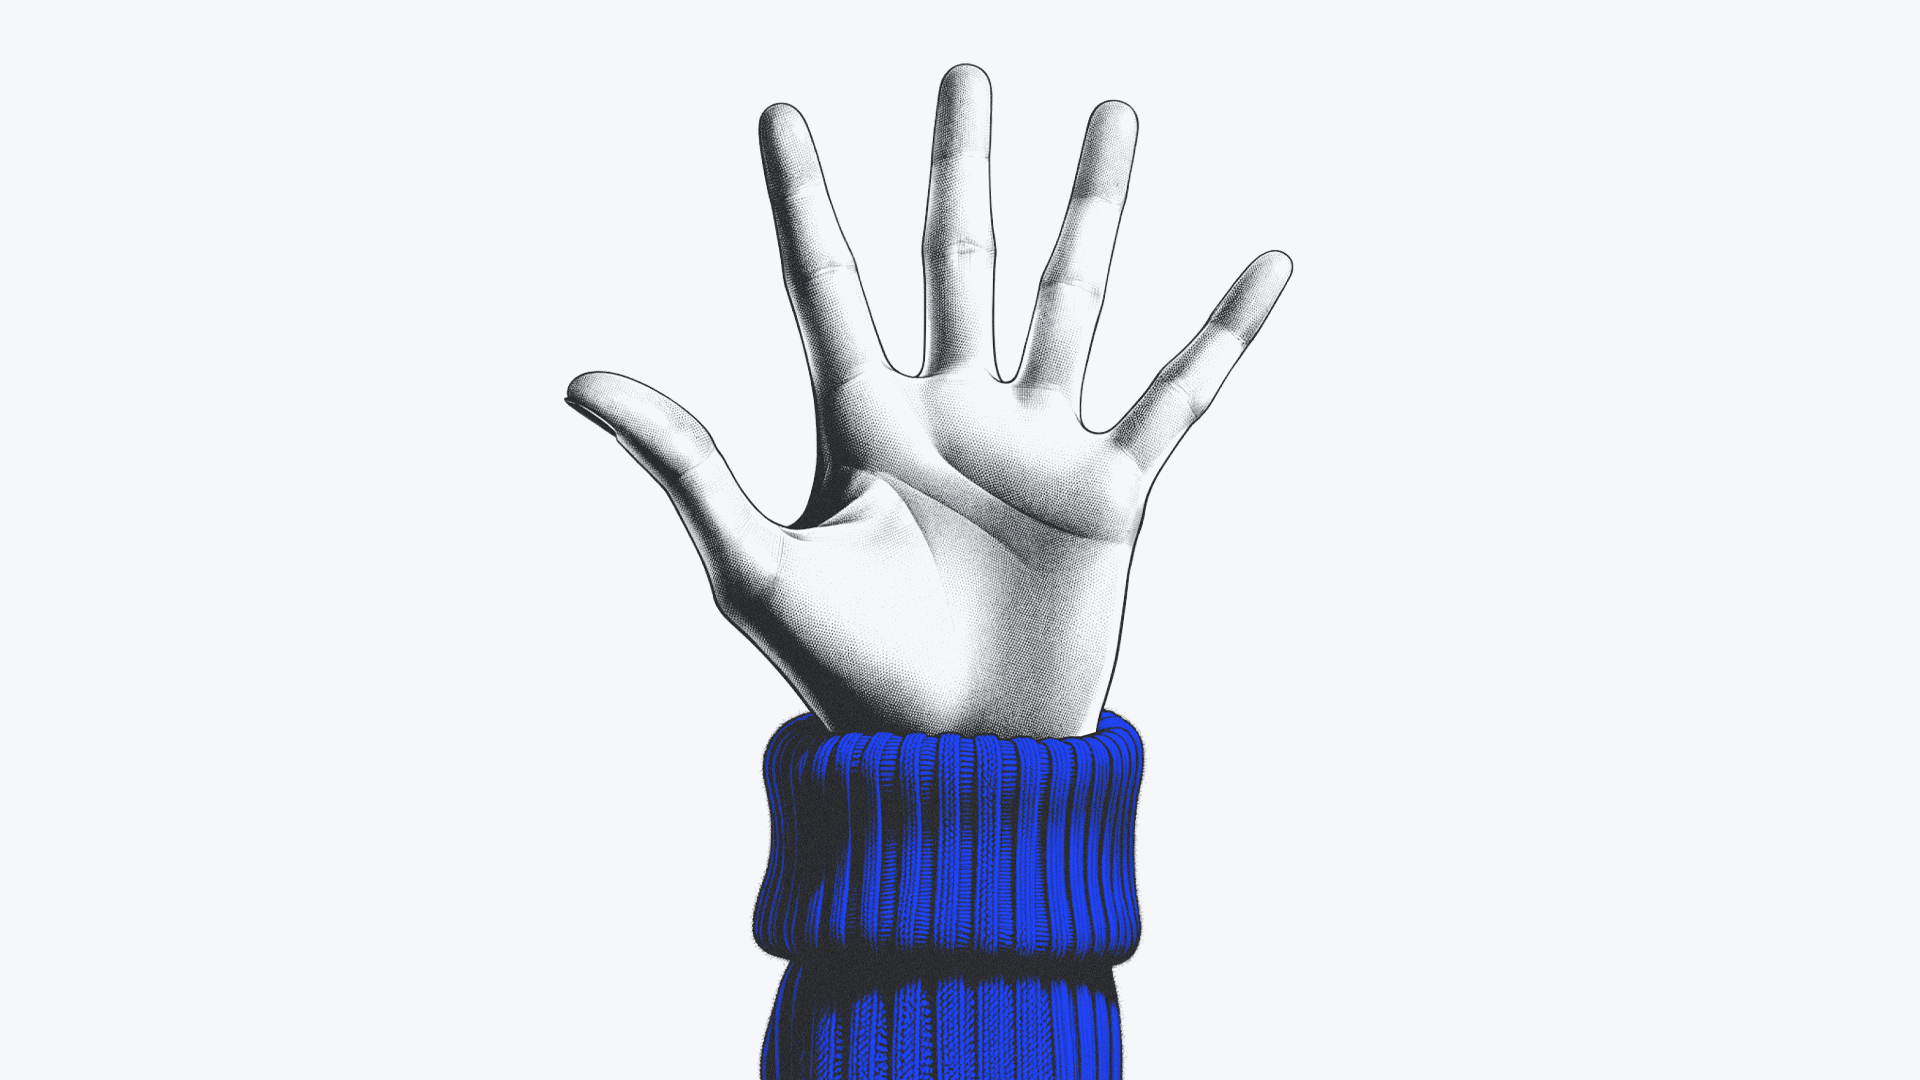 A stylized illustration of an open hand extending from a blue sweater sleeve against a white background.